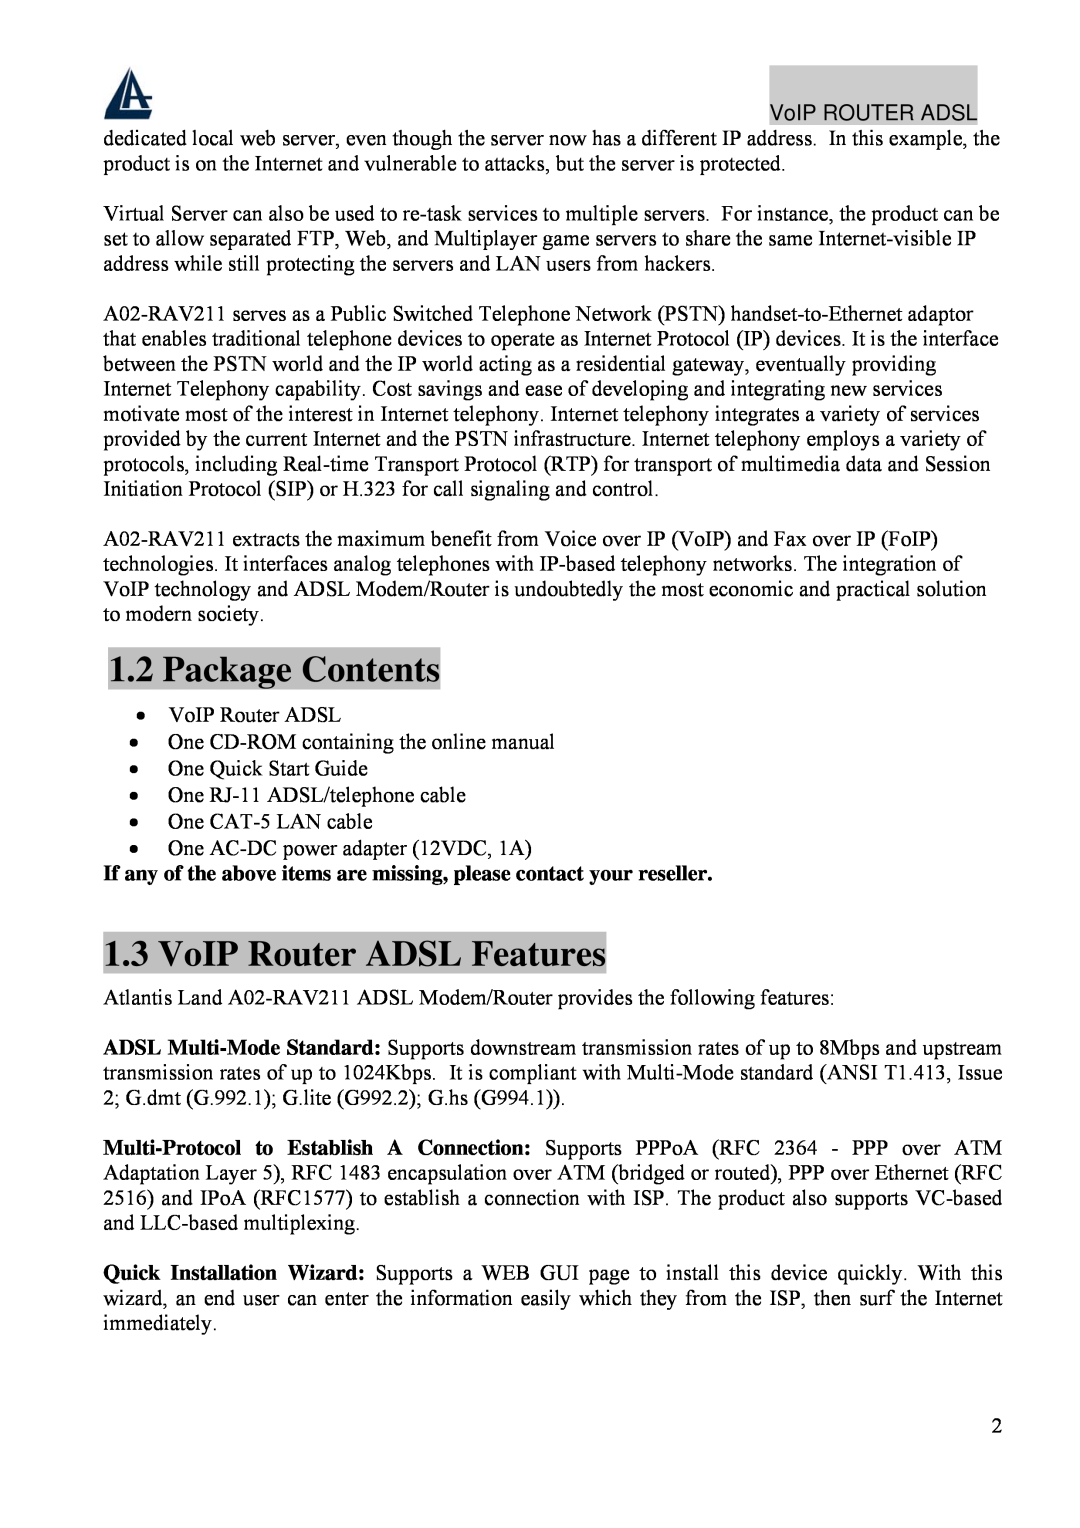 Atlantis Land A02-RAV211 manual Package Contents, VoIP Router ADSL Features 